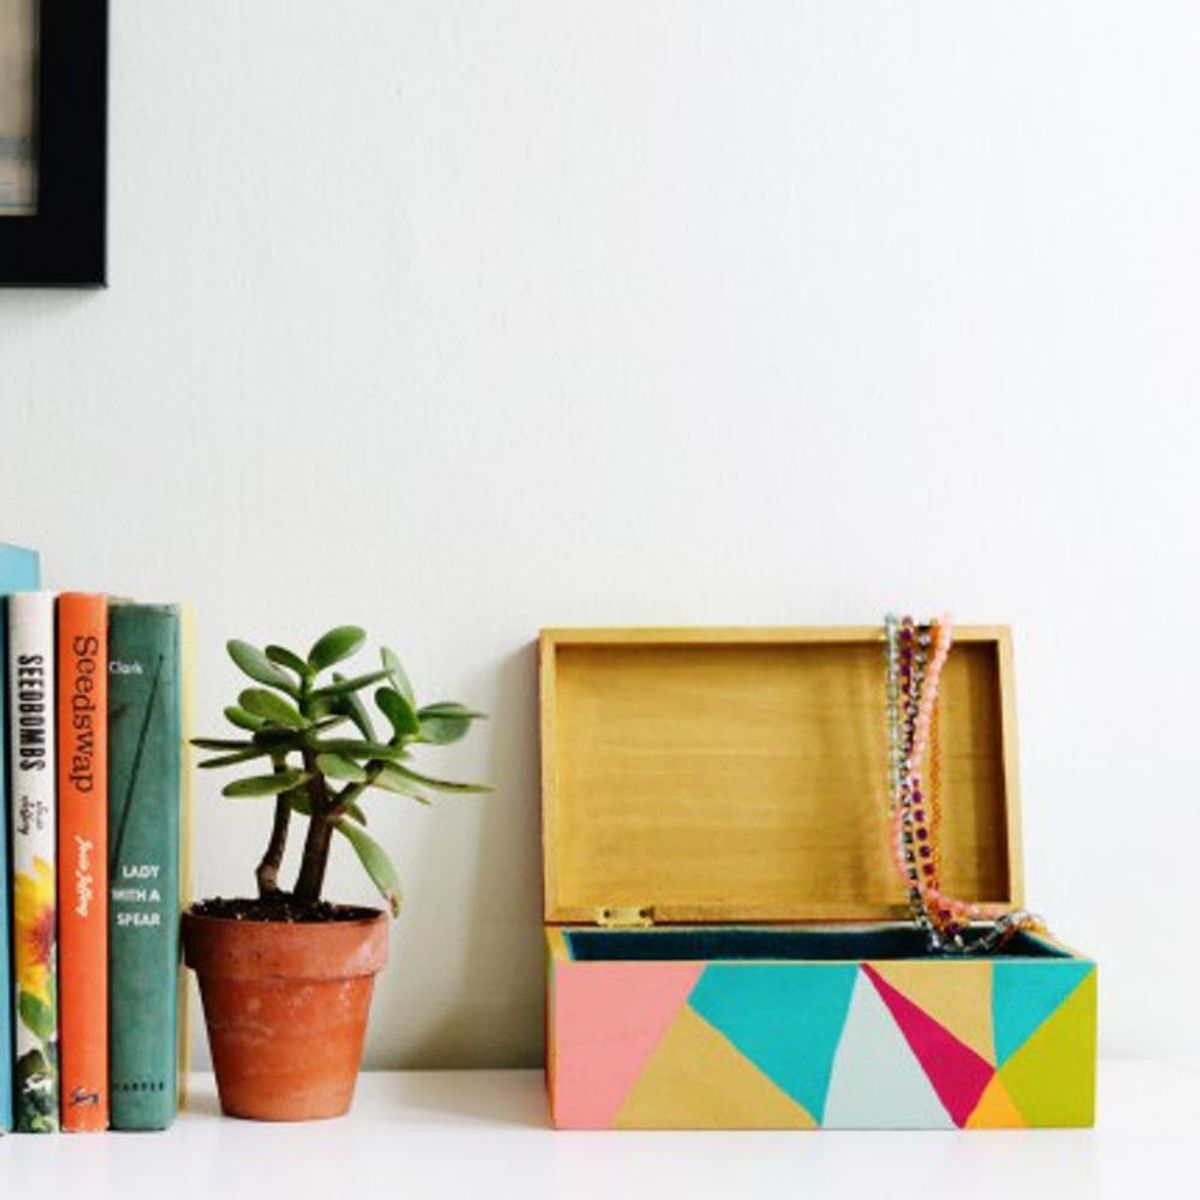 Organize Your Jewelry With This Colorful, Geometric DIY